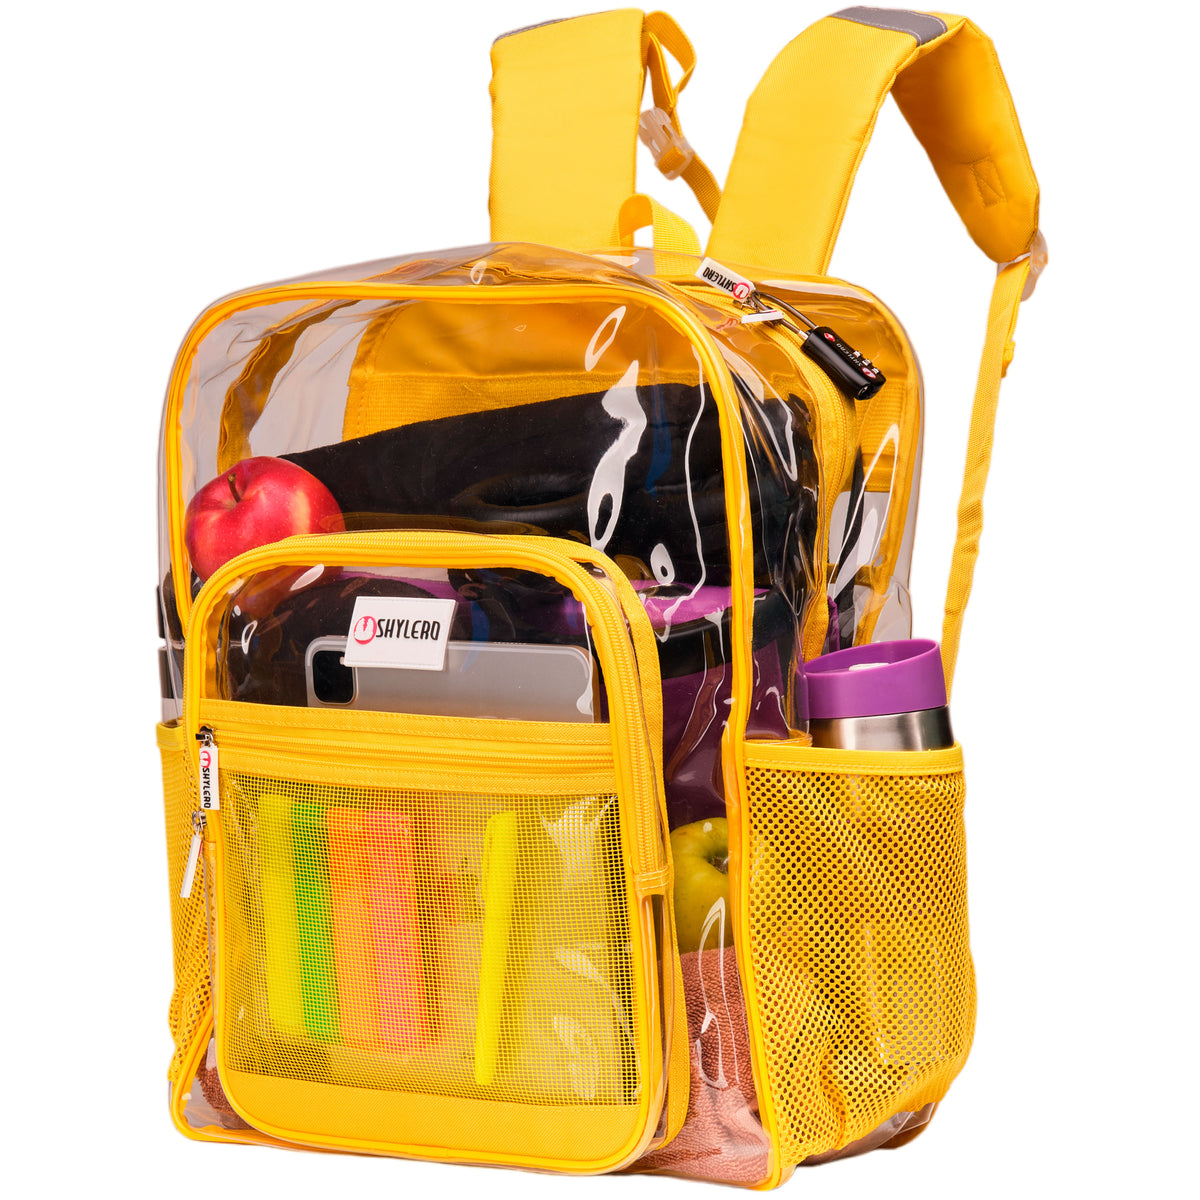 Clear Backpack For Work and School Backpack XL | TSA Lock | H18" x W14" x D8" (45cm x 35cm x 20cm) | 32 L | Yellow Rhino